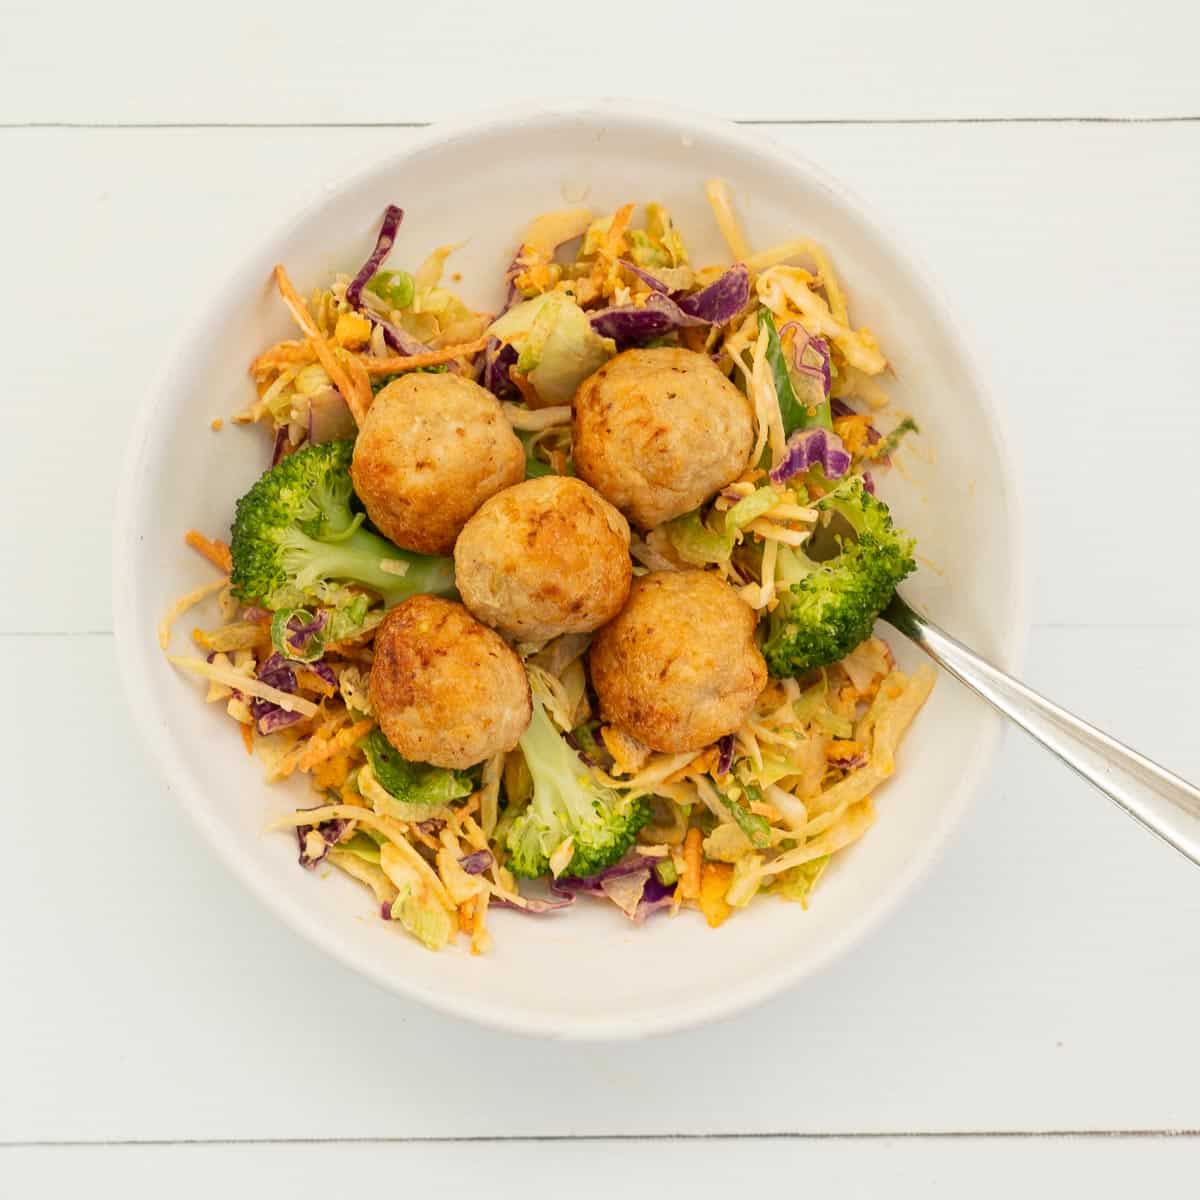 A white bowl filled with coleslaw, broccoli and 5 chicken rissoles